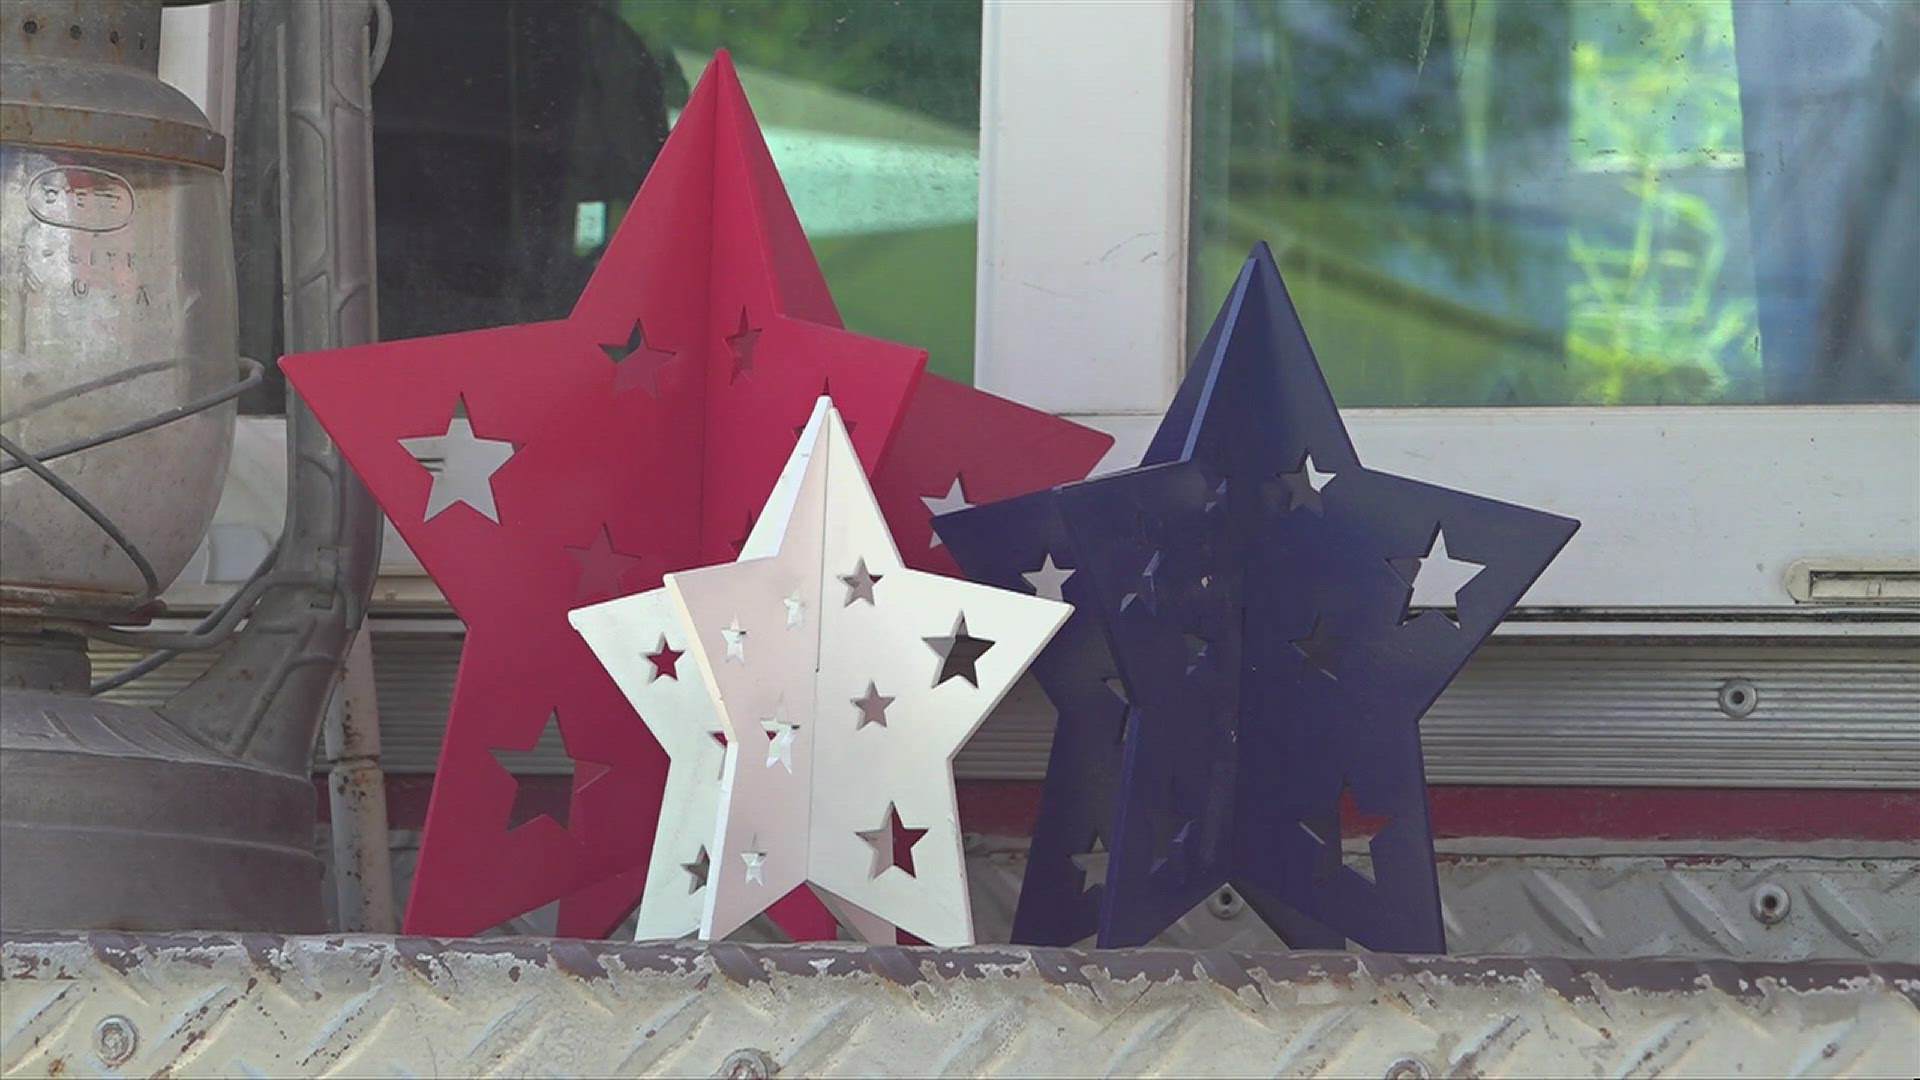 FOX54's Gabe Glassman reports from Huntsville as the MidCity district gets ready for an Independence Day party.